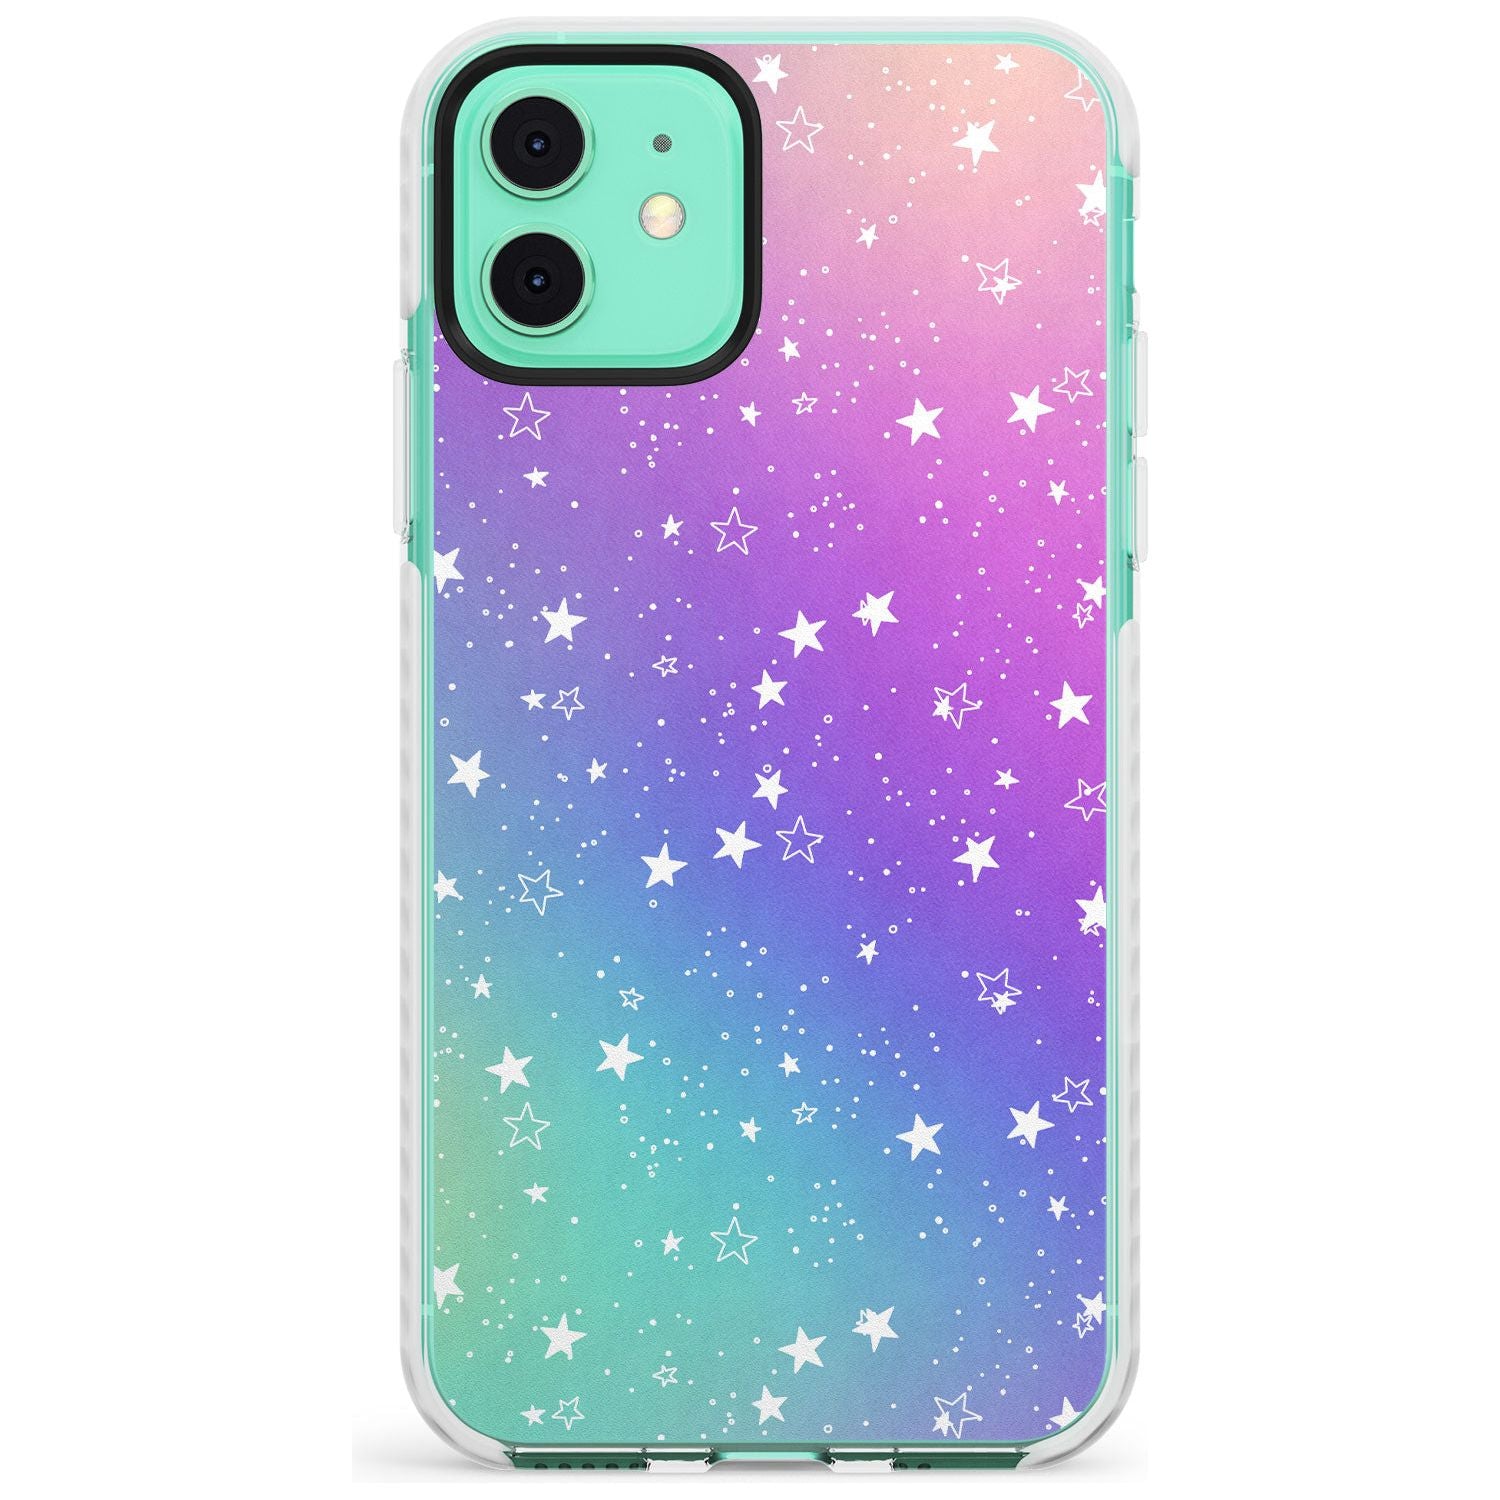 White Stars on Pastels Slim TPU Phone Case for iPhone 11